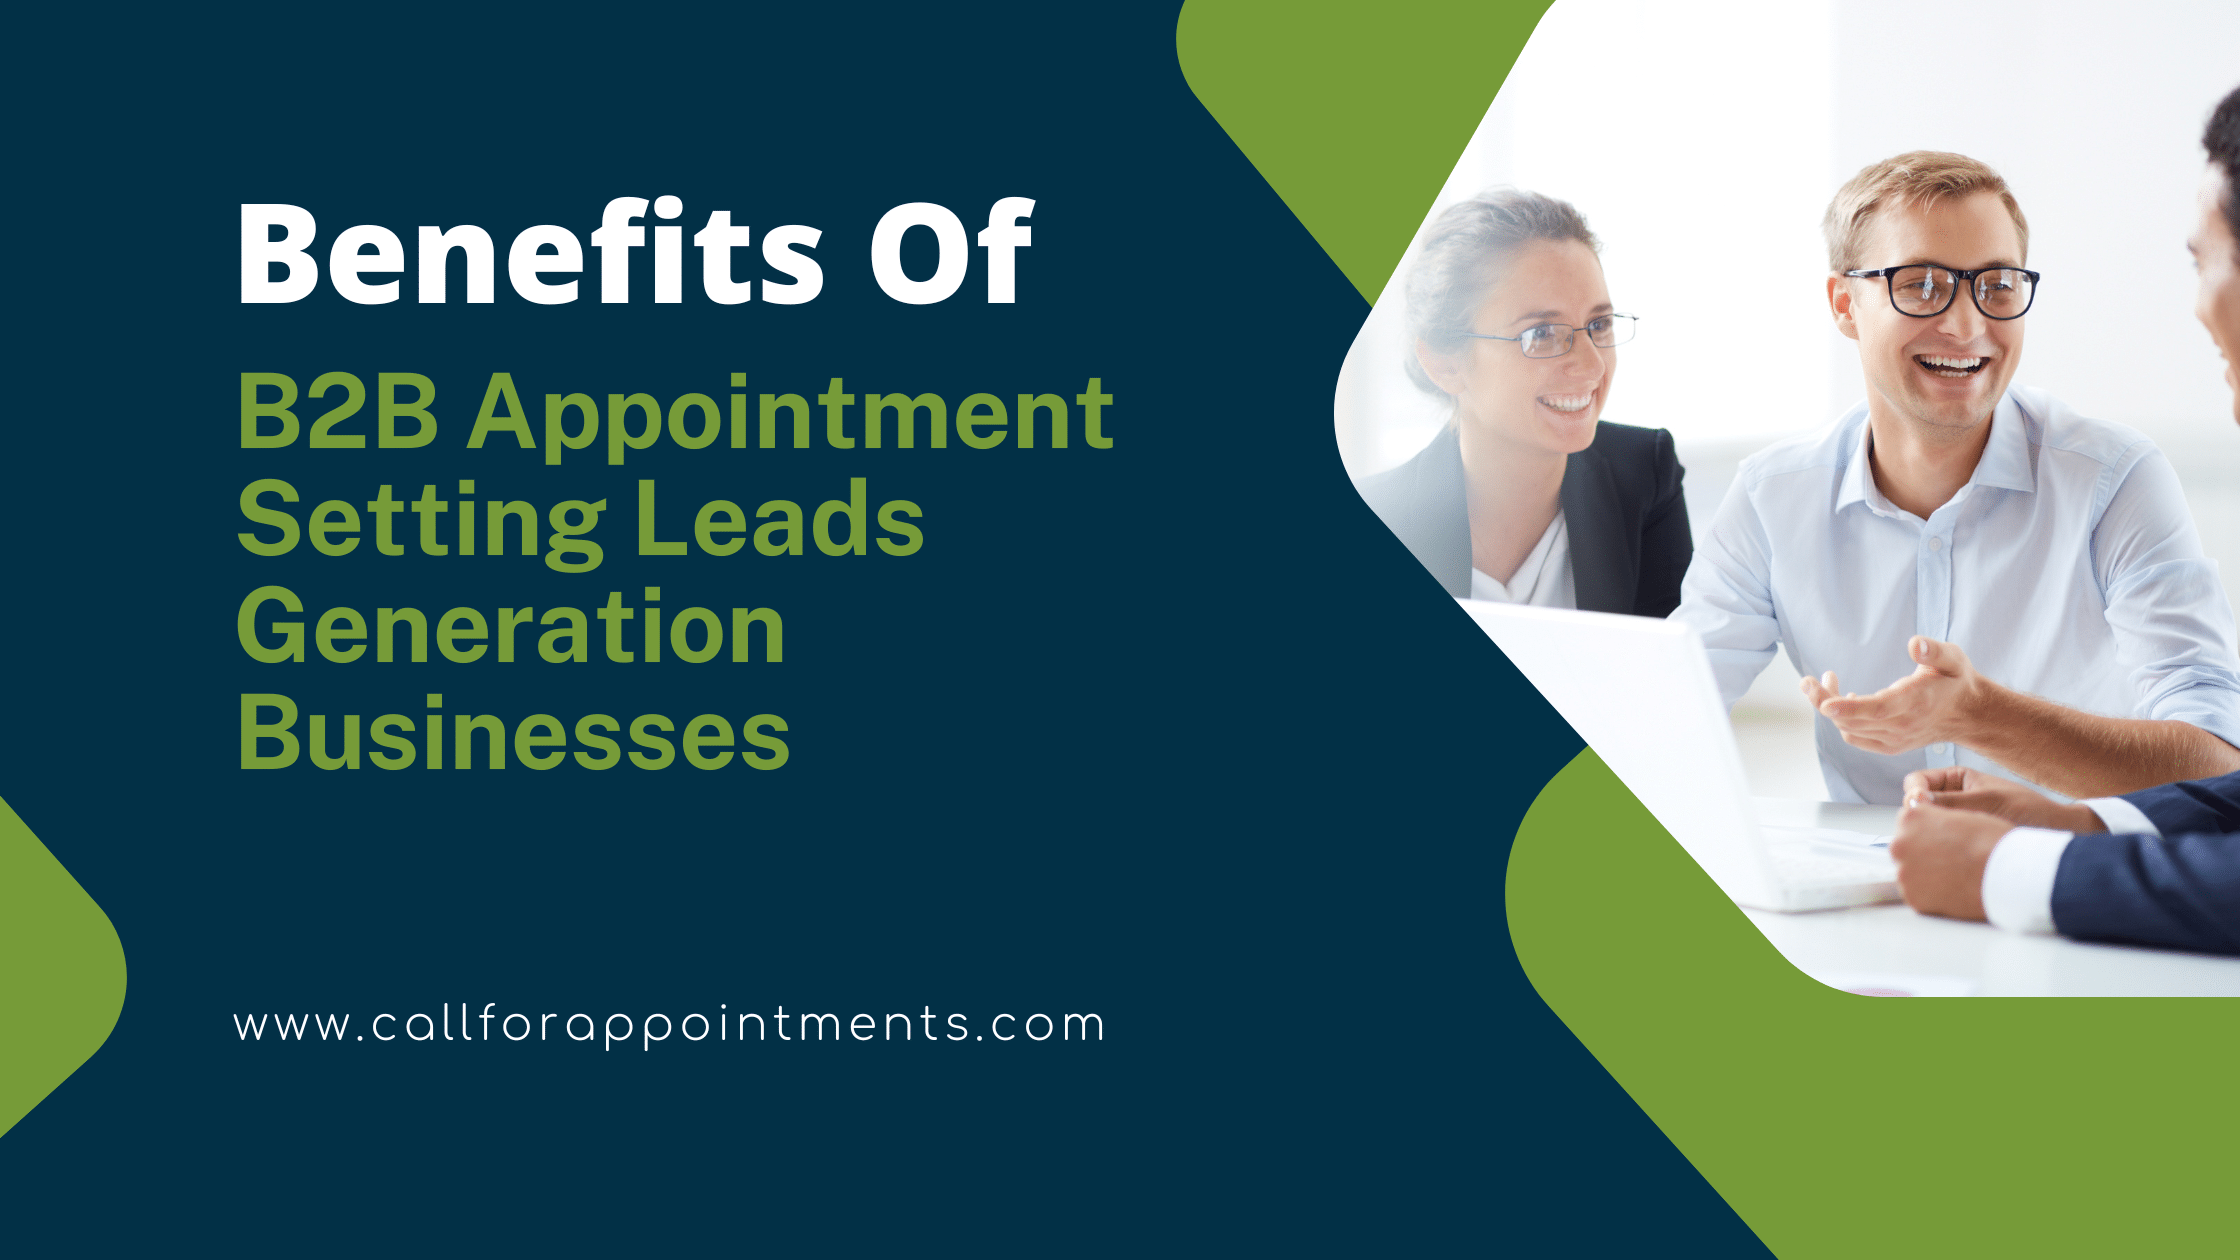 Benefits of b2b appointment setting leads generation businesses